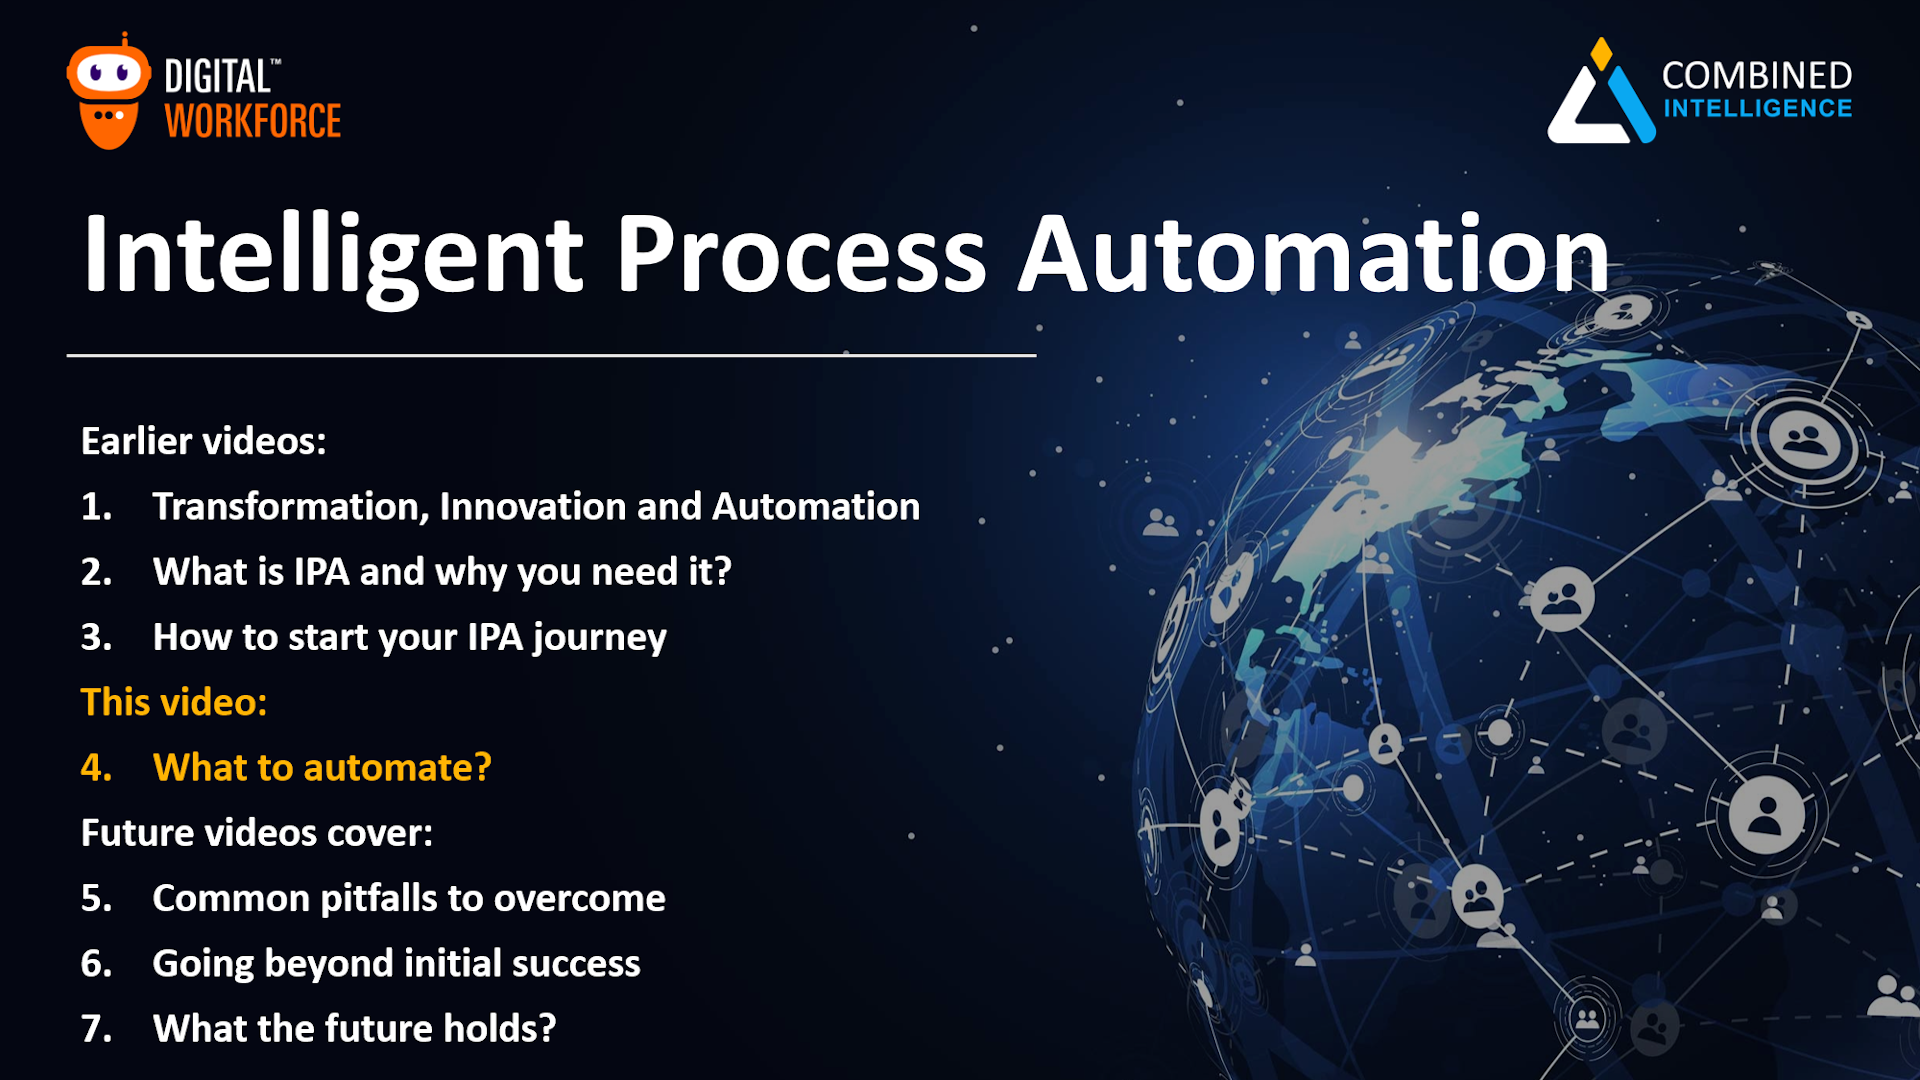 Intelligent Process Automation Video 4 – What to automate?